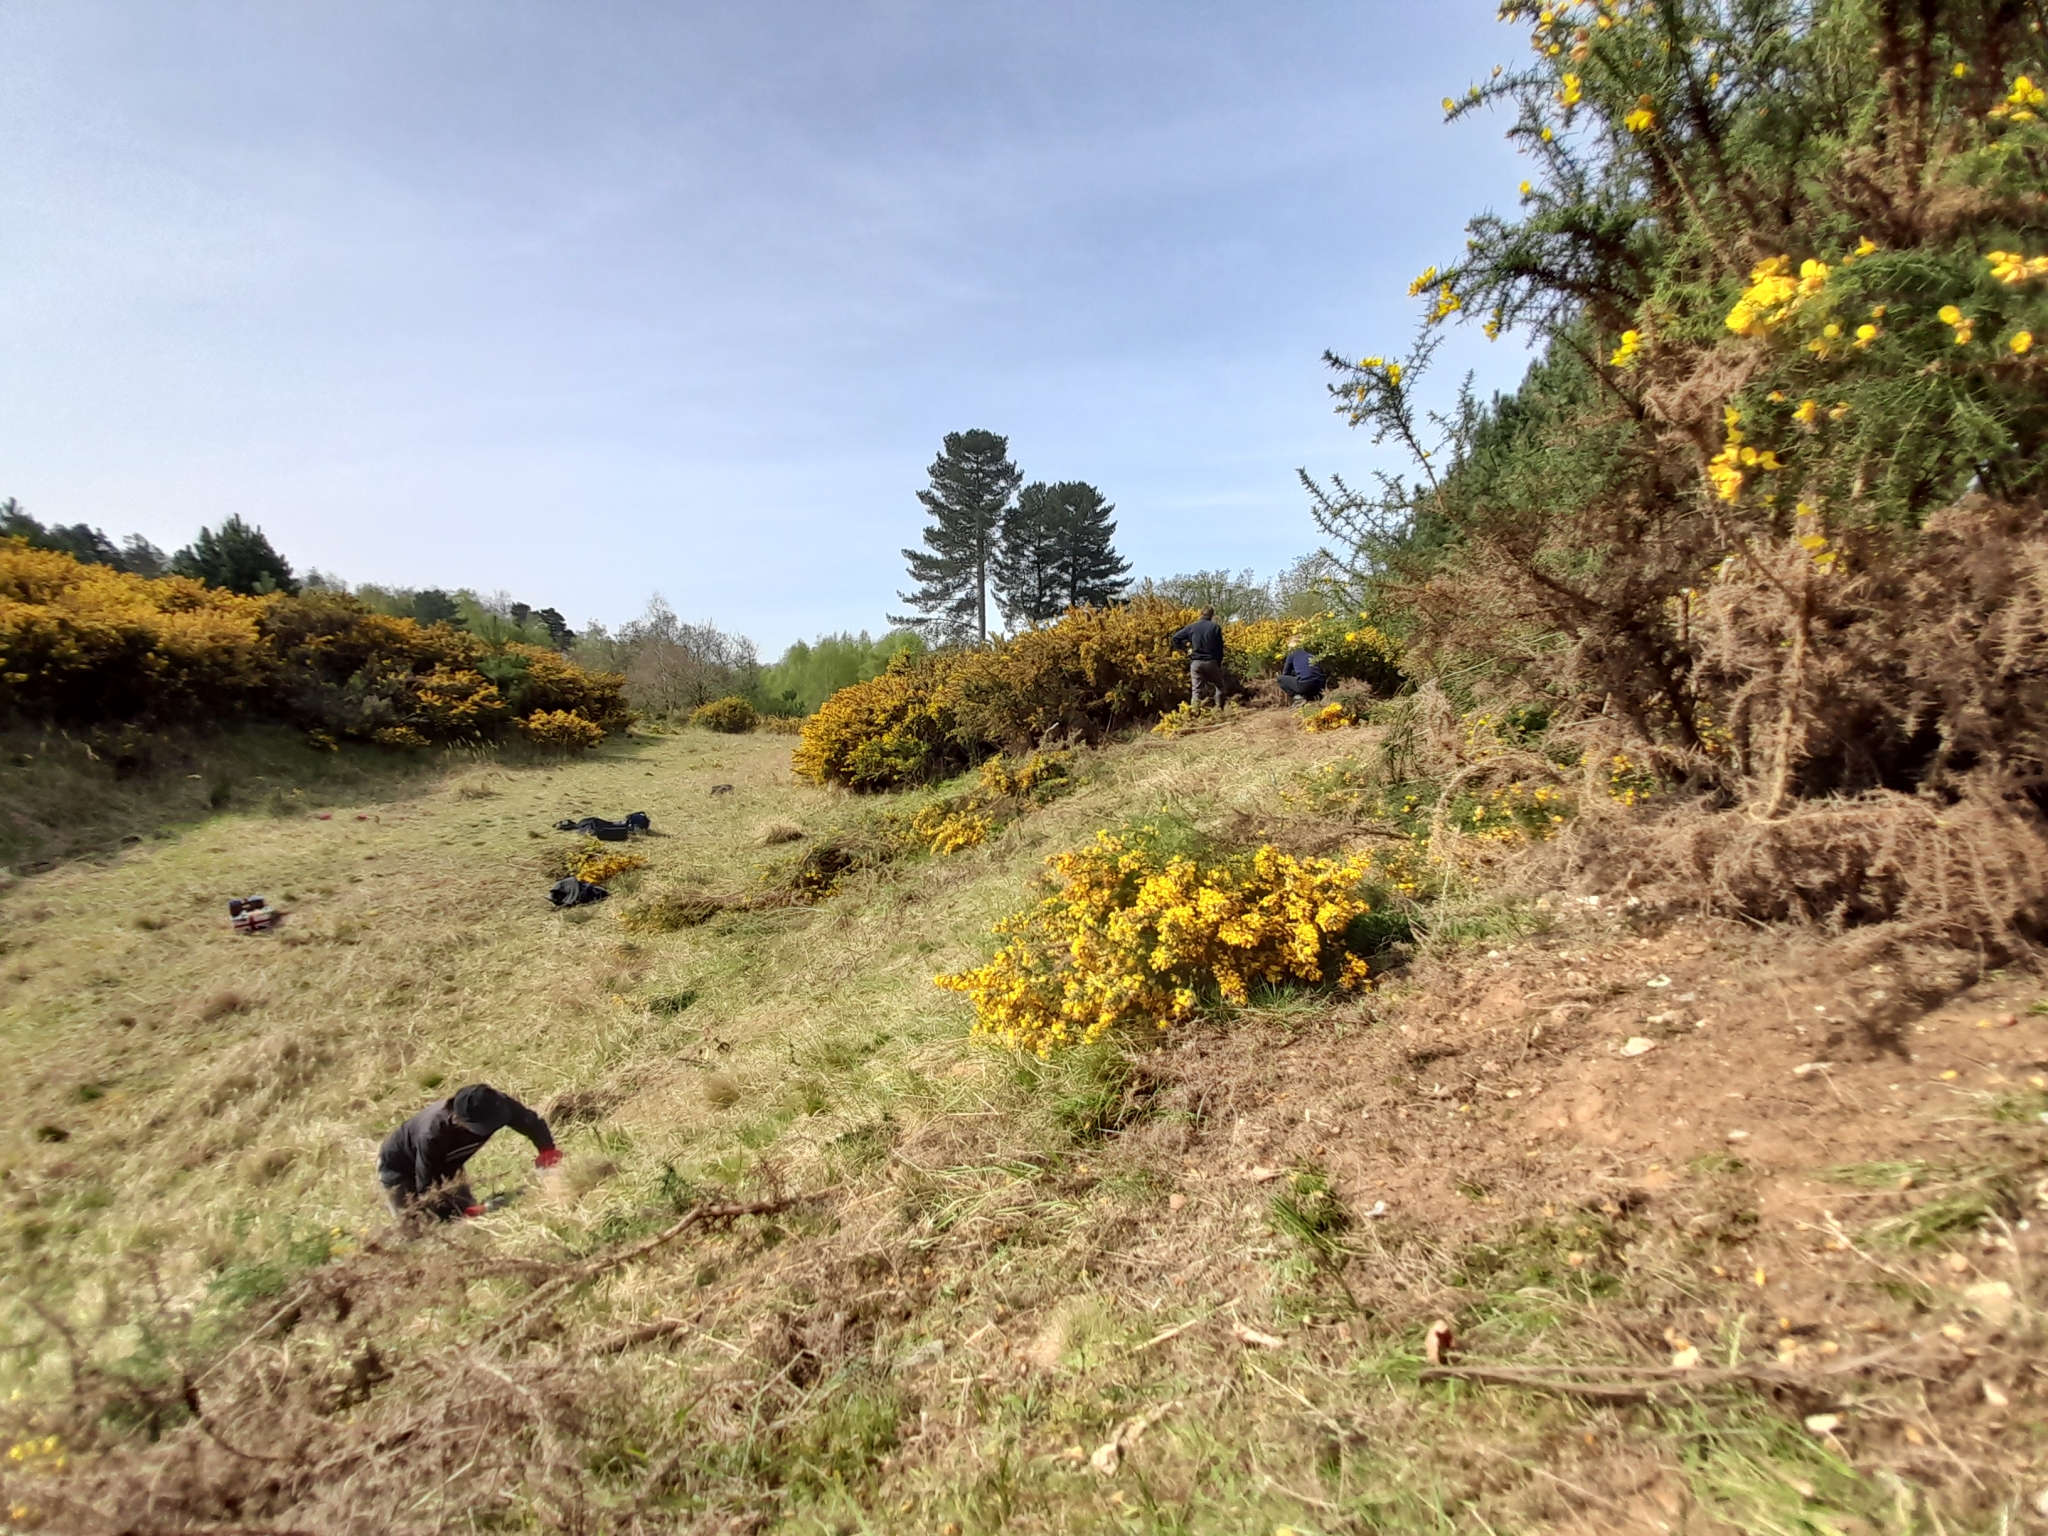 A photo from the FoTF Conservation Event - April 2022 - Scrub Clearance at Mildenhall Mugwort Pits : Volunteers work amongst the Gorse at the top of the pit, while another volunteer work on the slope